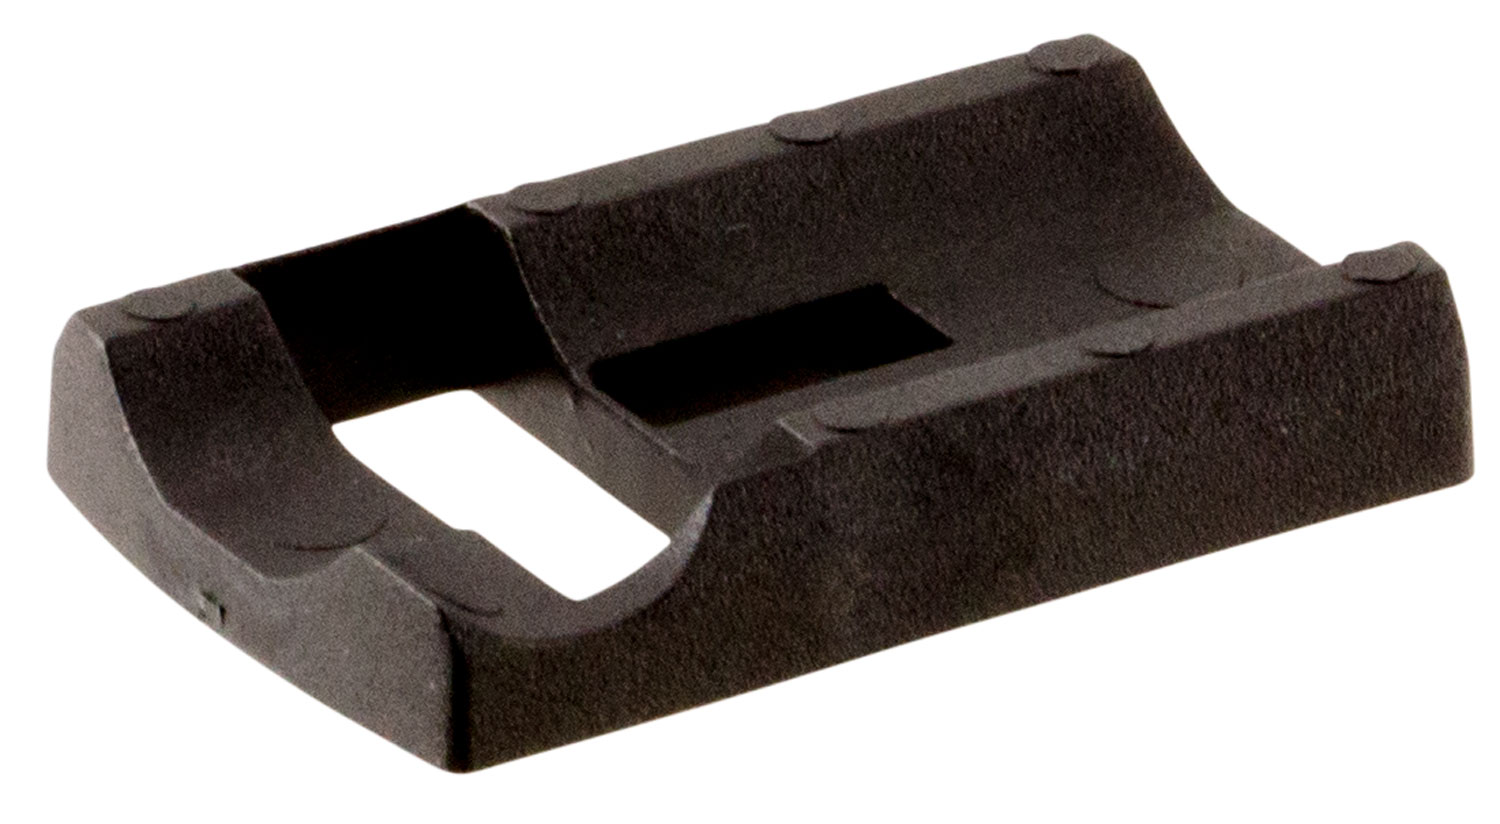 Leupold 170908 DletaPoint Pro Base For Sig Sauer P226 Dovetail Style Blk Matte Finish